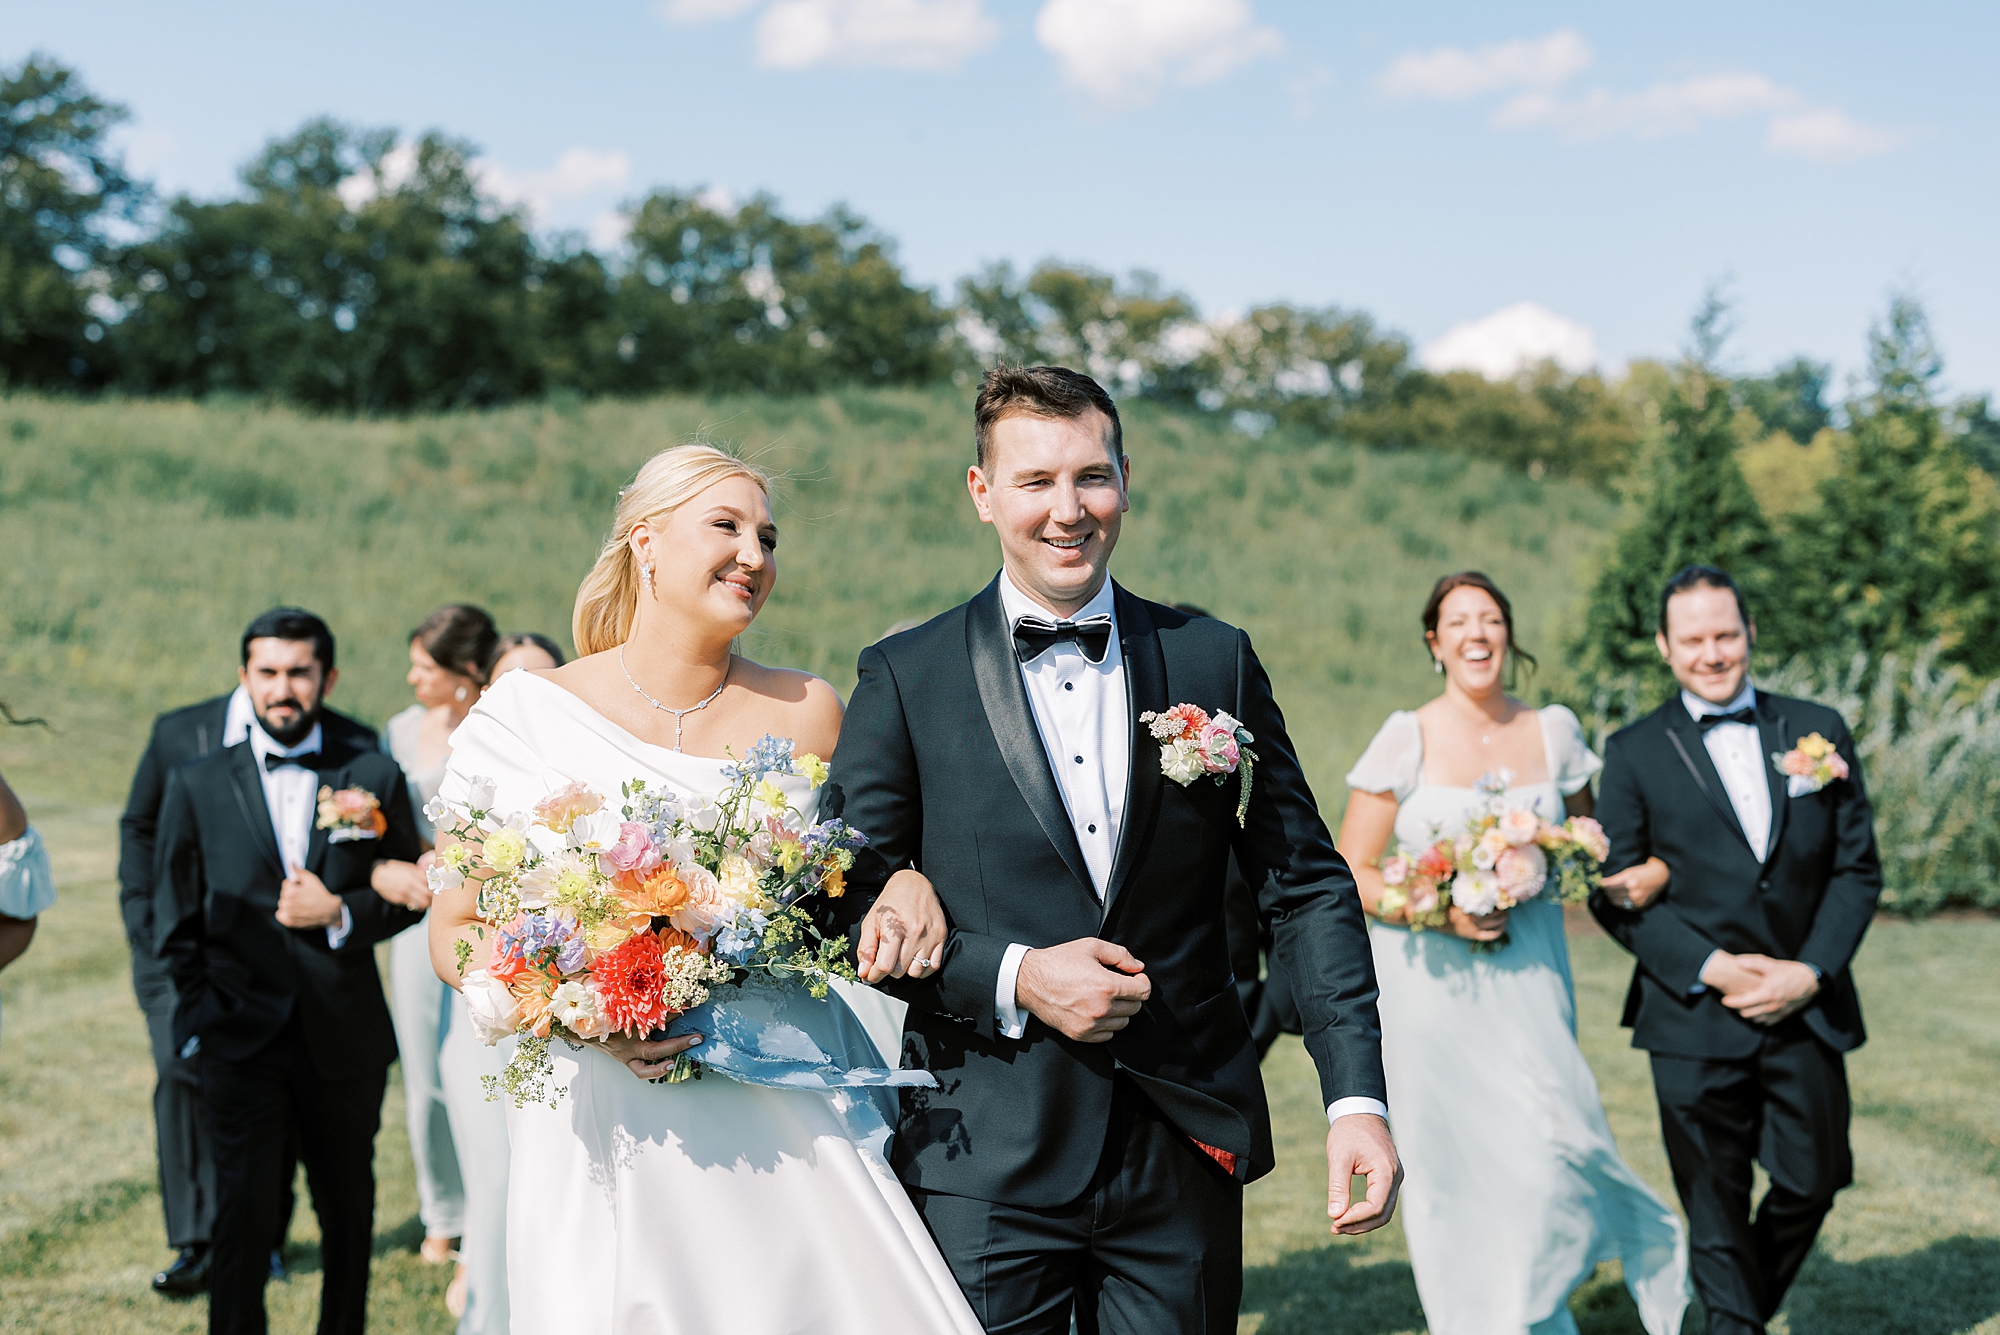 bride smiles at groom walking on field of grass with wedding party behind them 